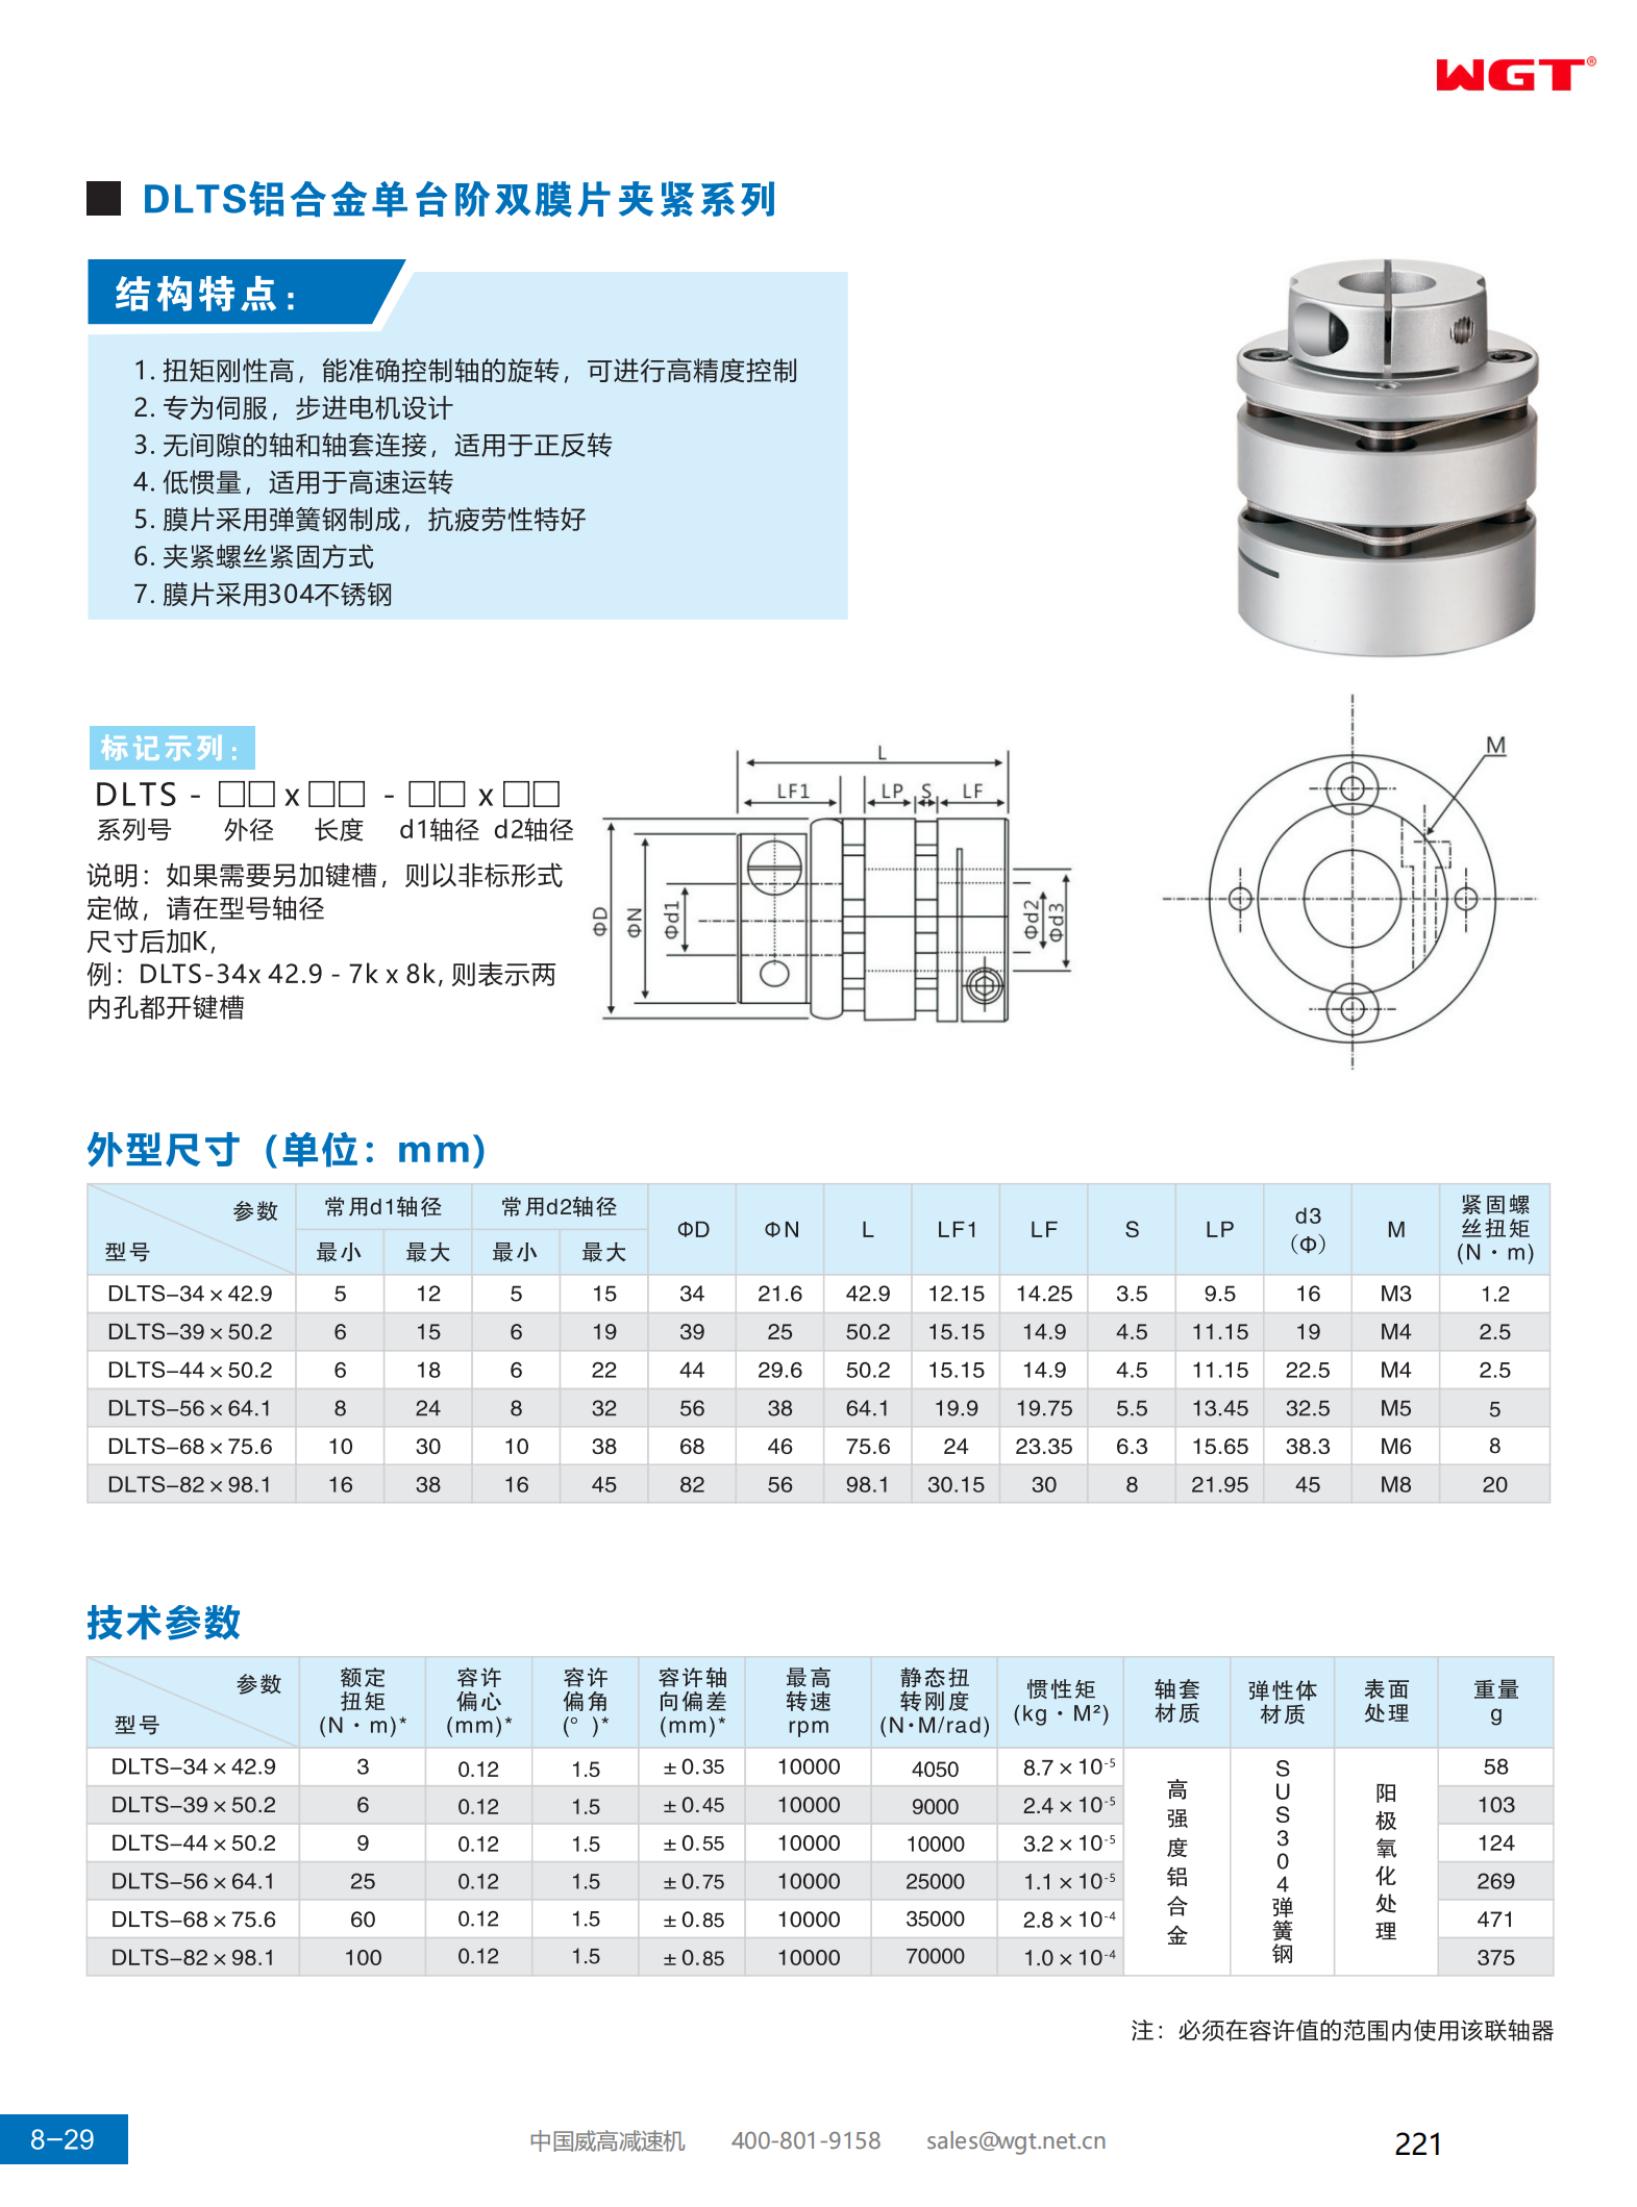 DLTS aluminum alloy single step double diaphragm clamping series